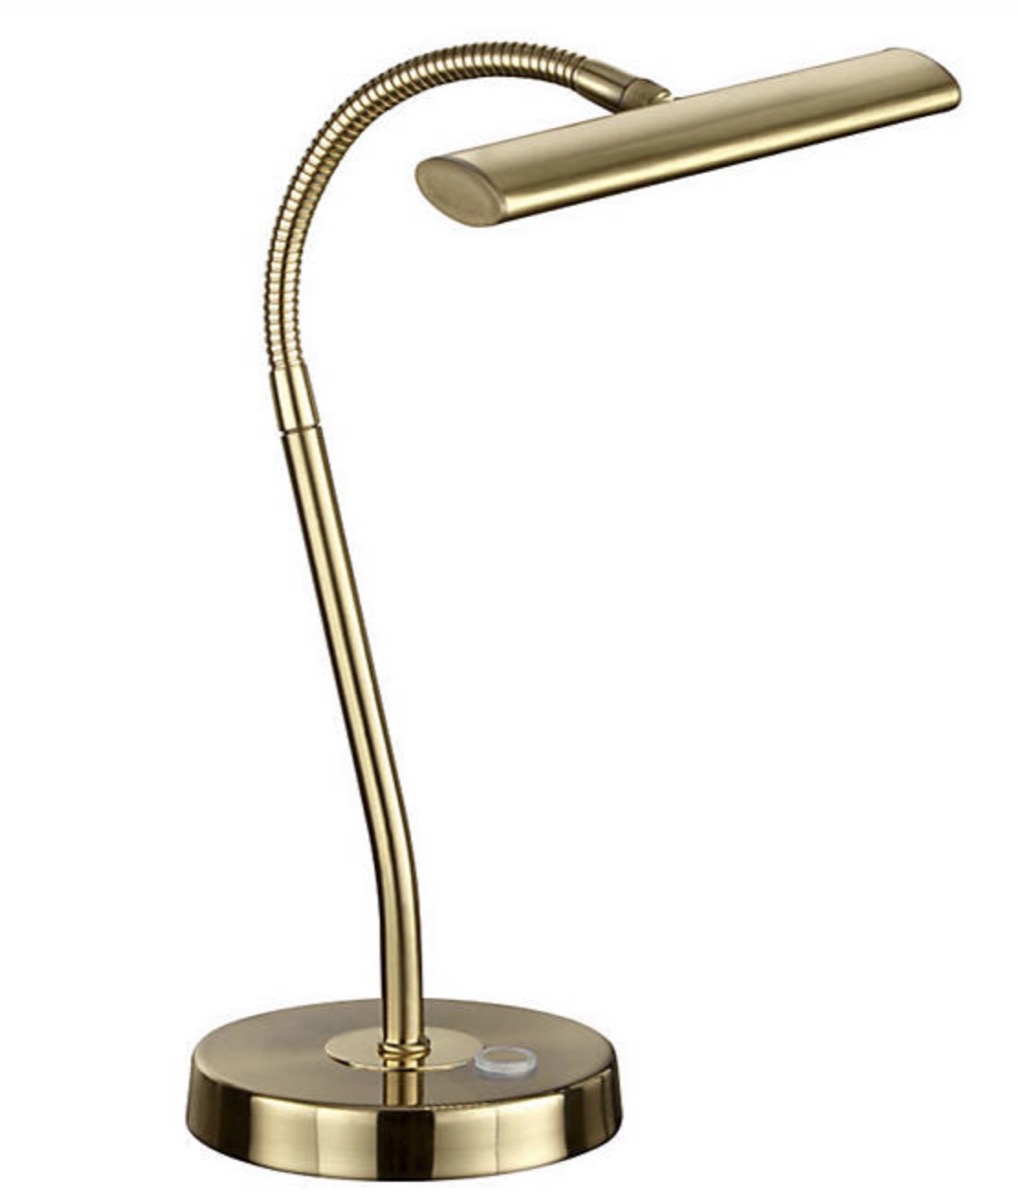 gooseneck brass desk lamp, old fashioned home items